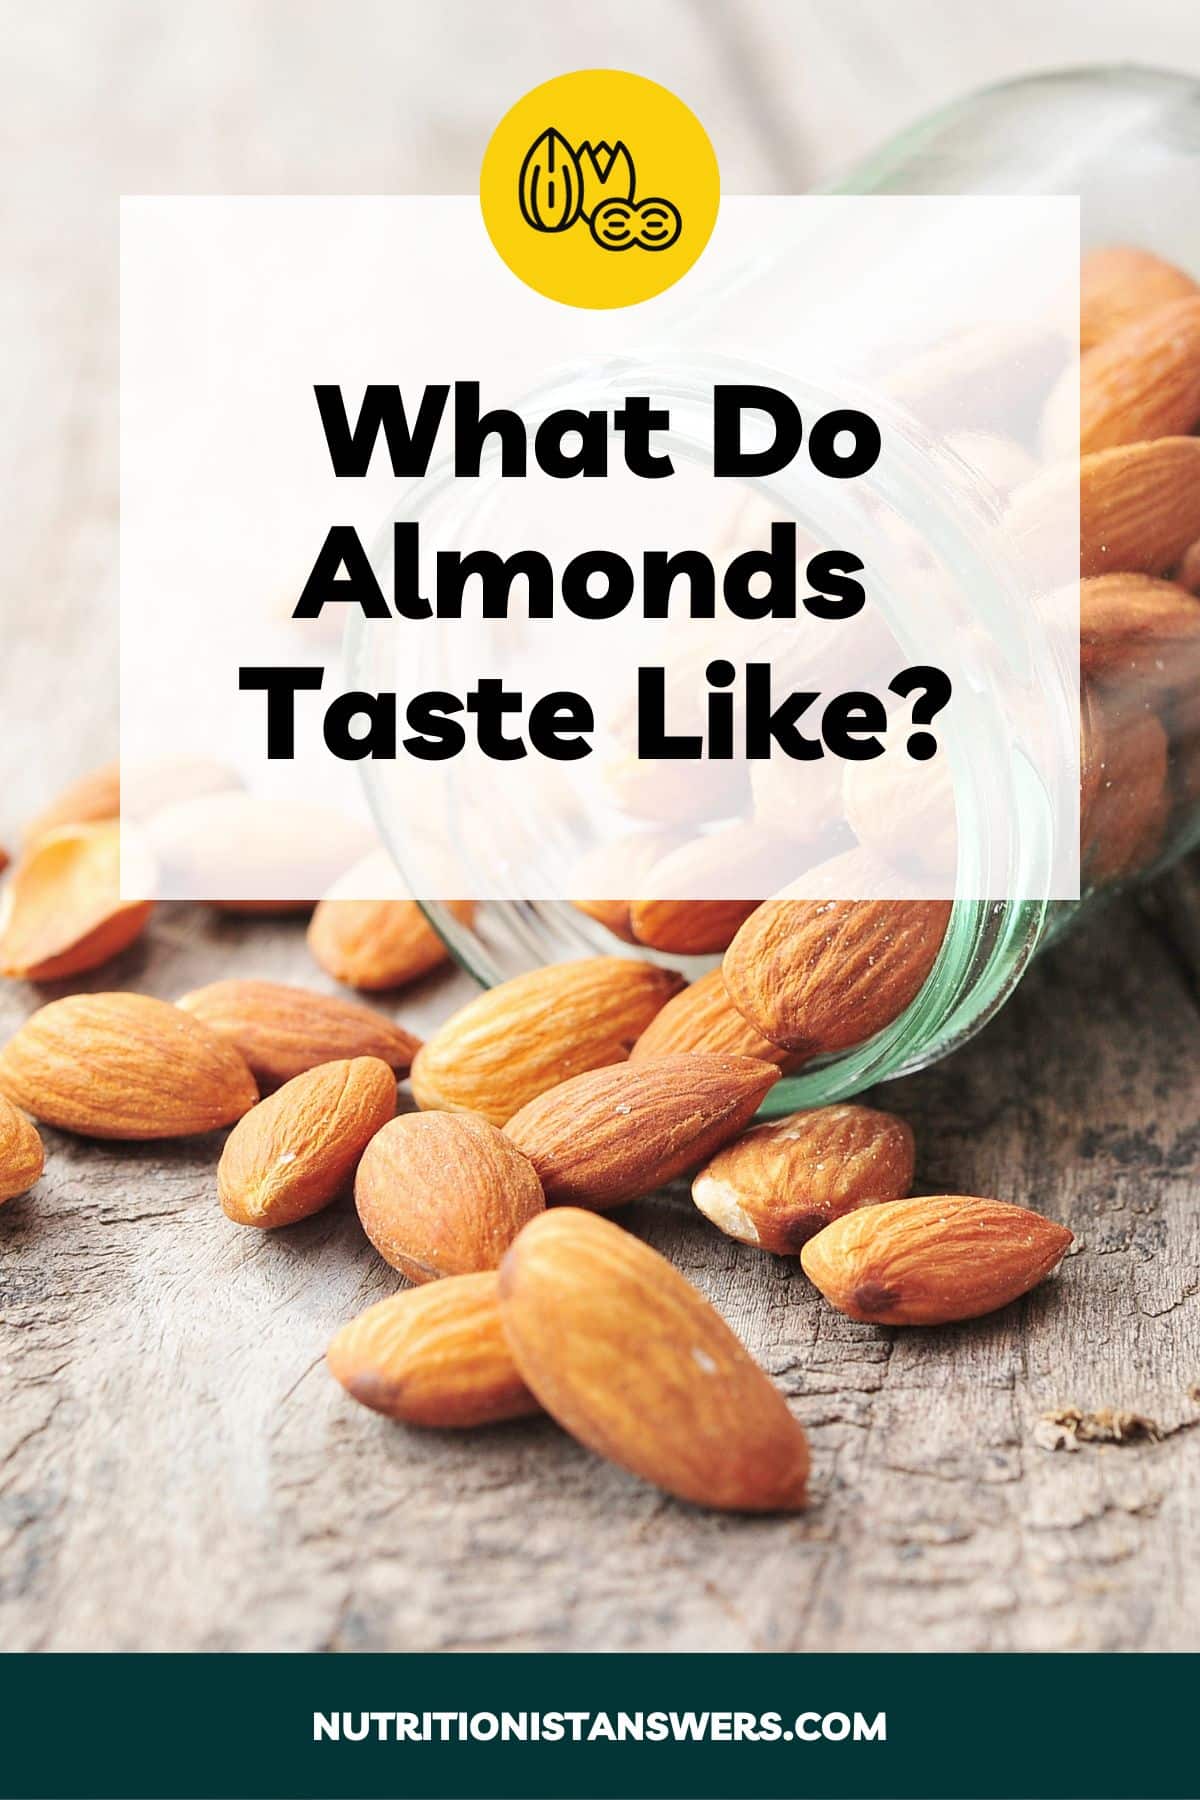 What Do Almonds Taste Like? A Nutritionist’s Review